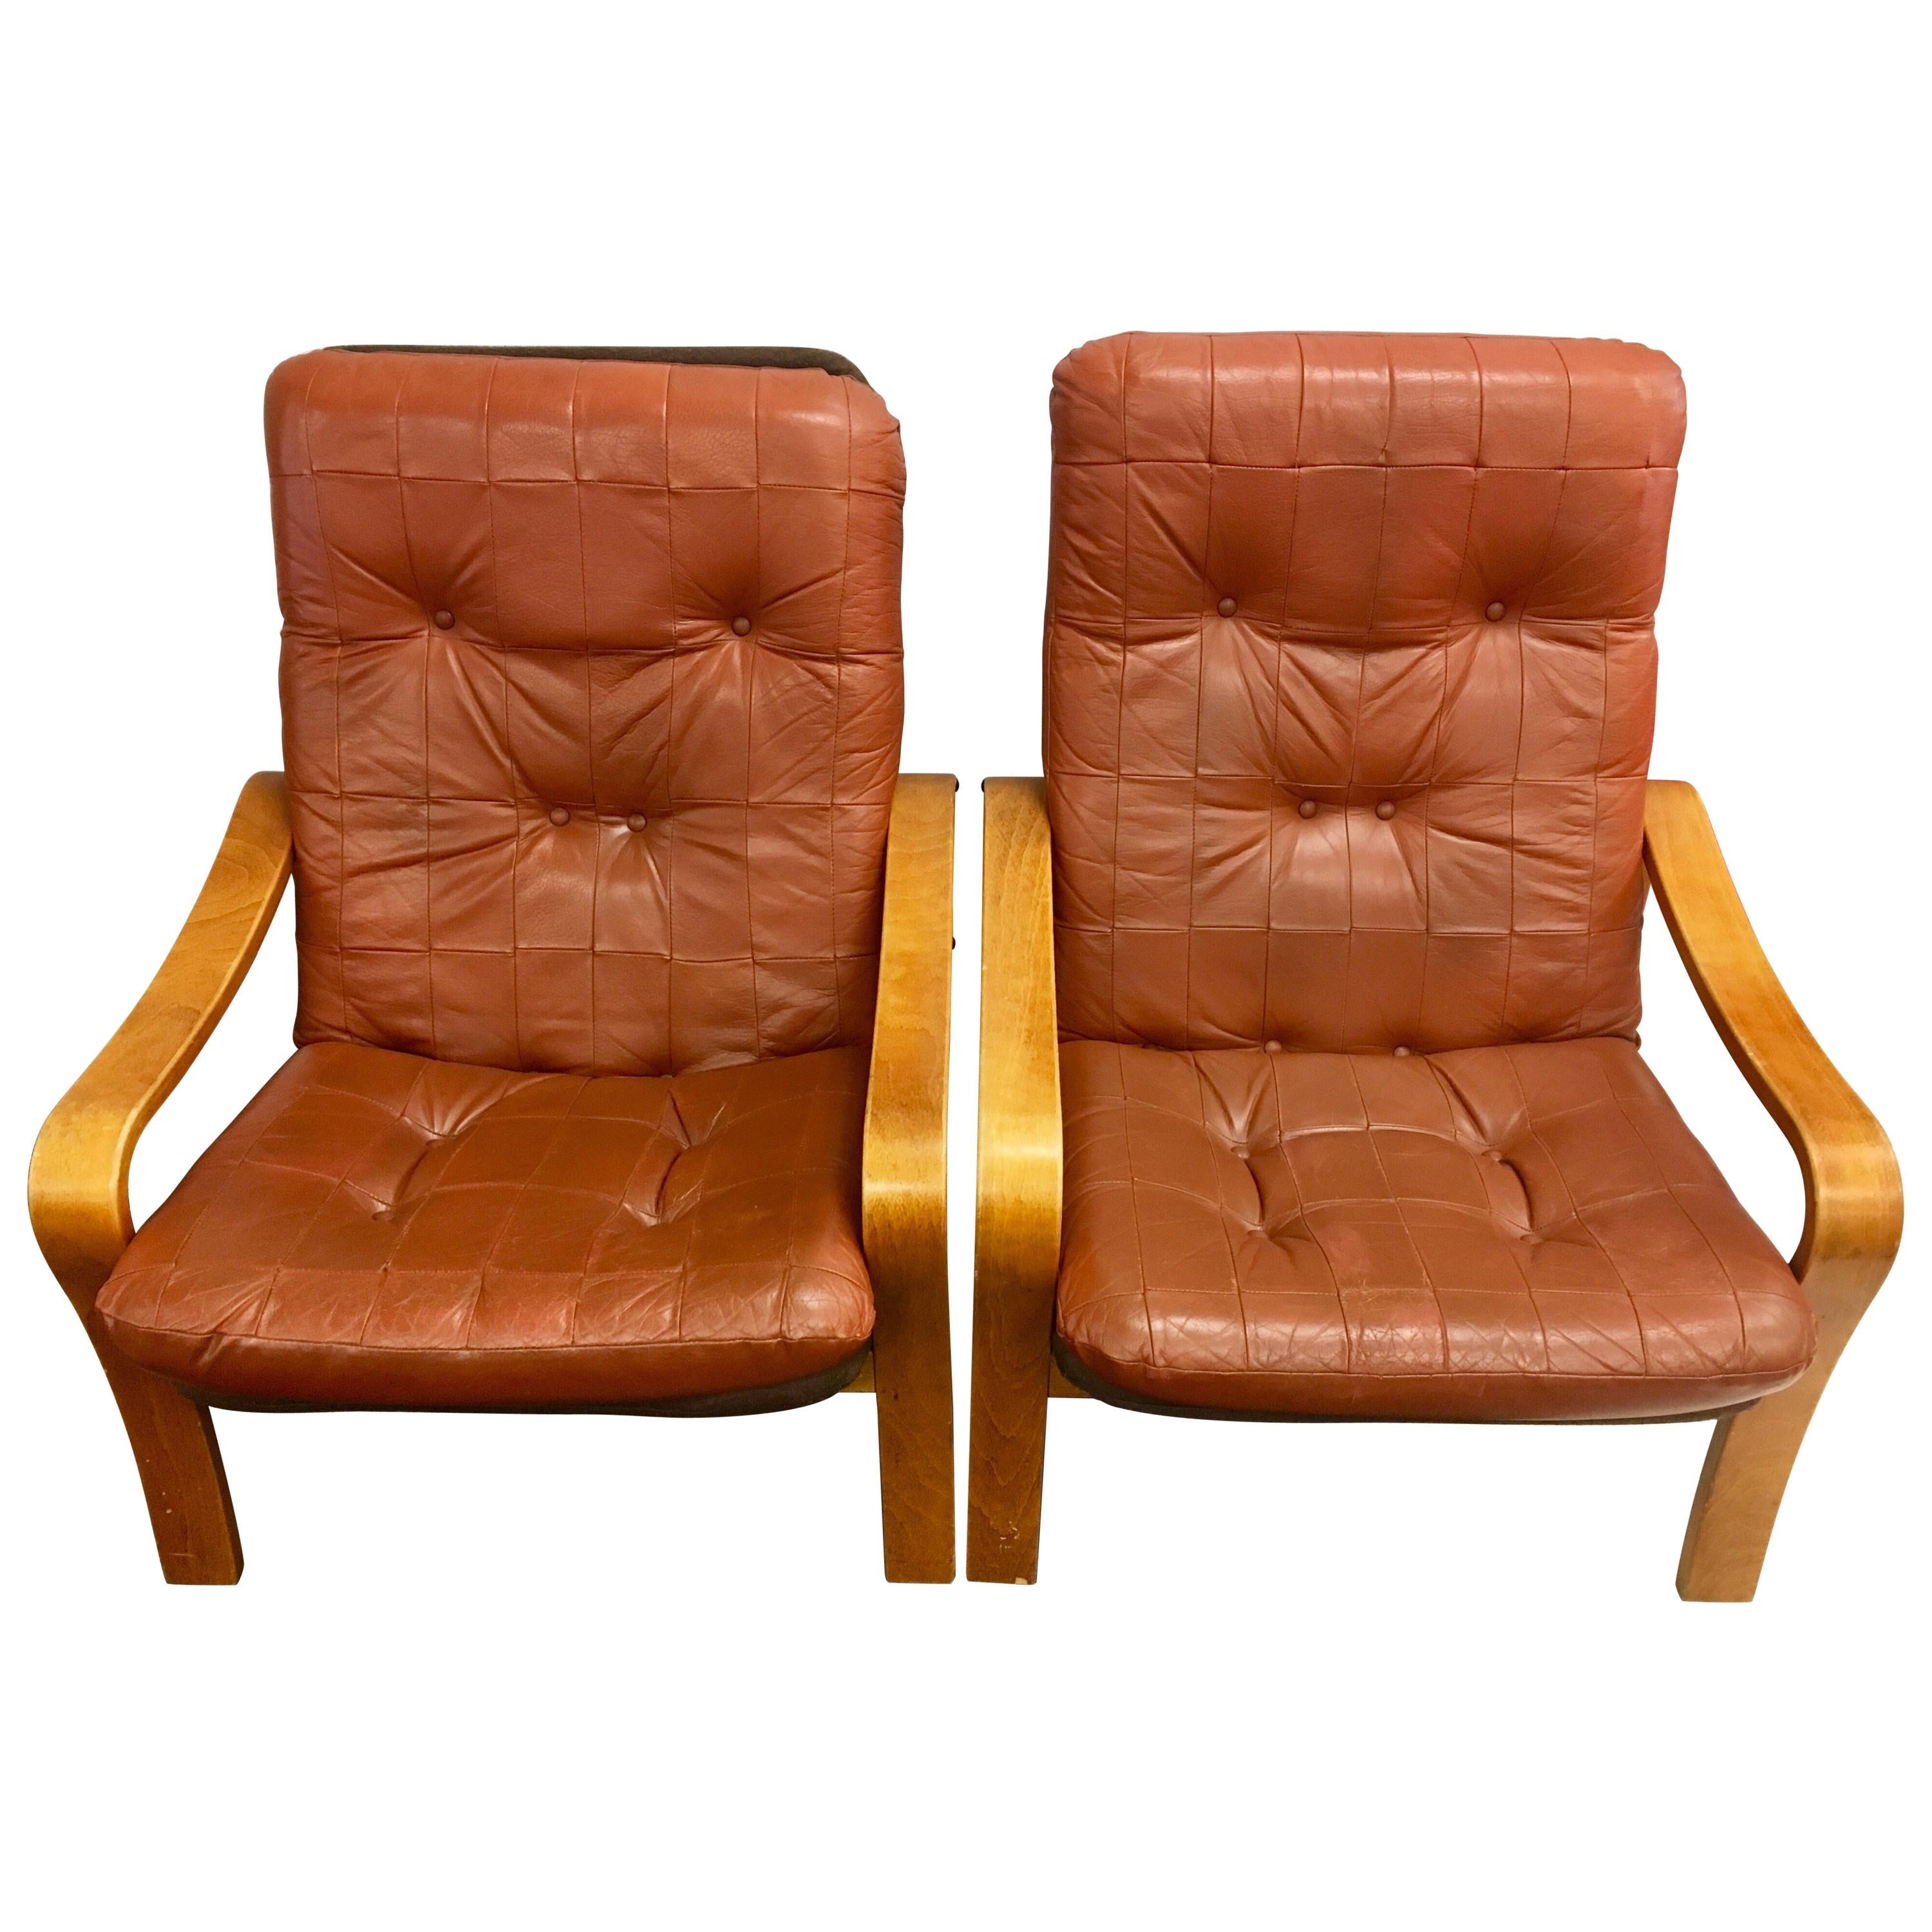 Pair of Danish Modern Teak and Tufted Leather Lounge Chairs